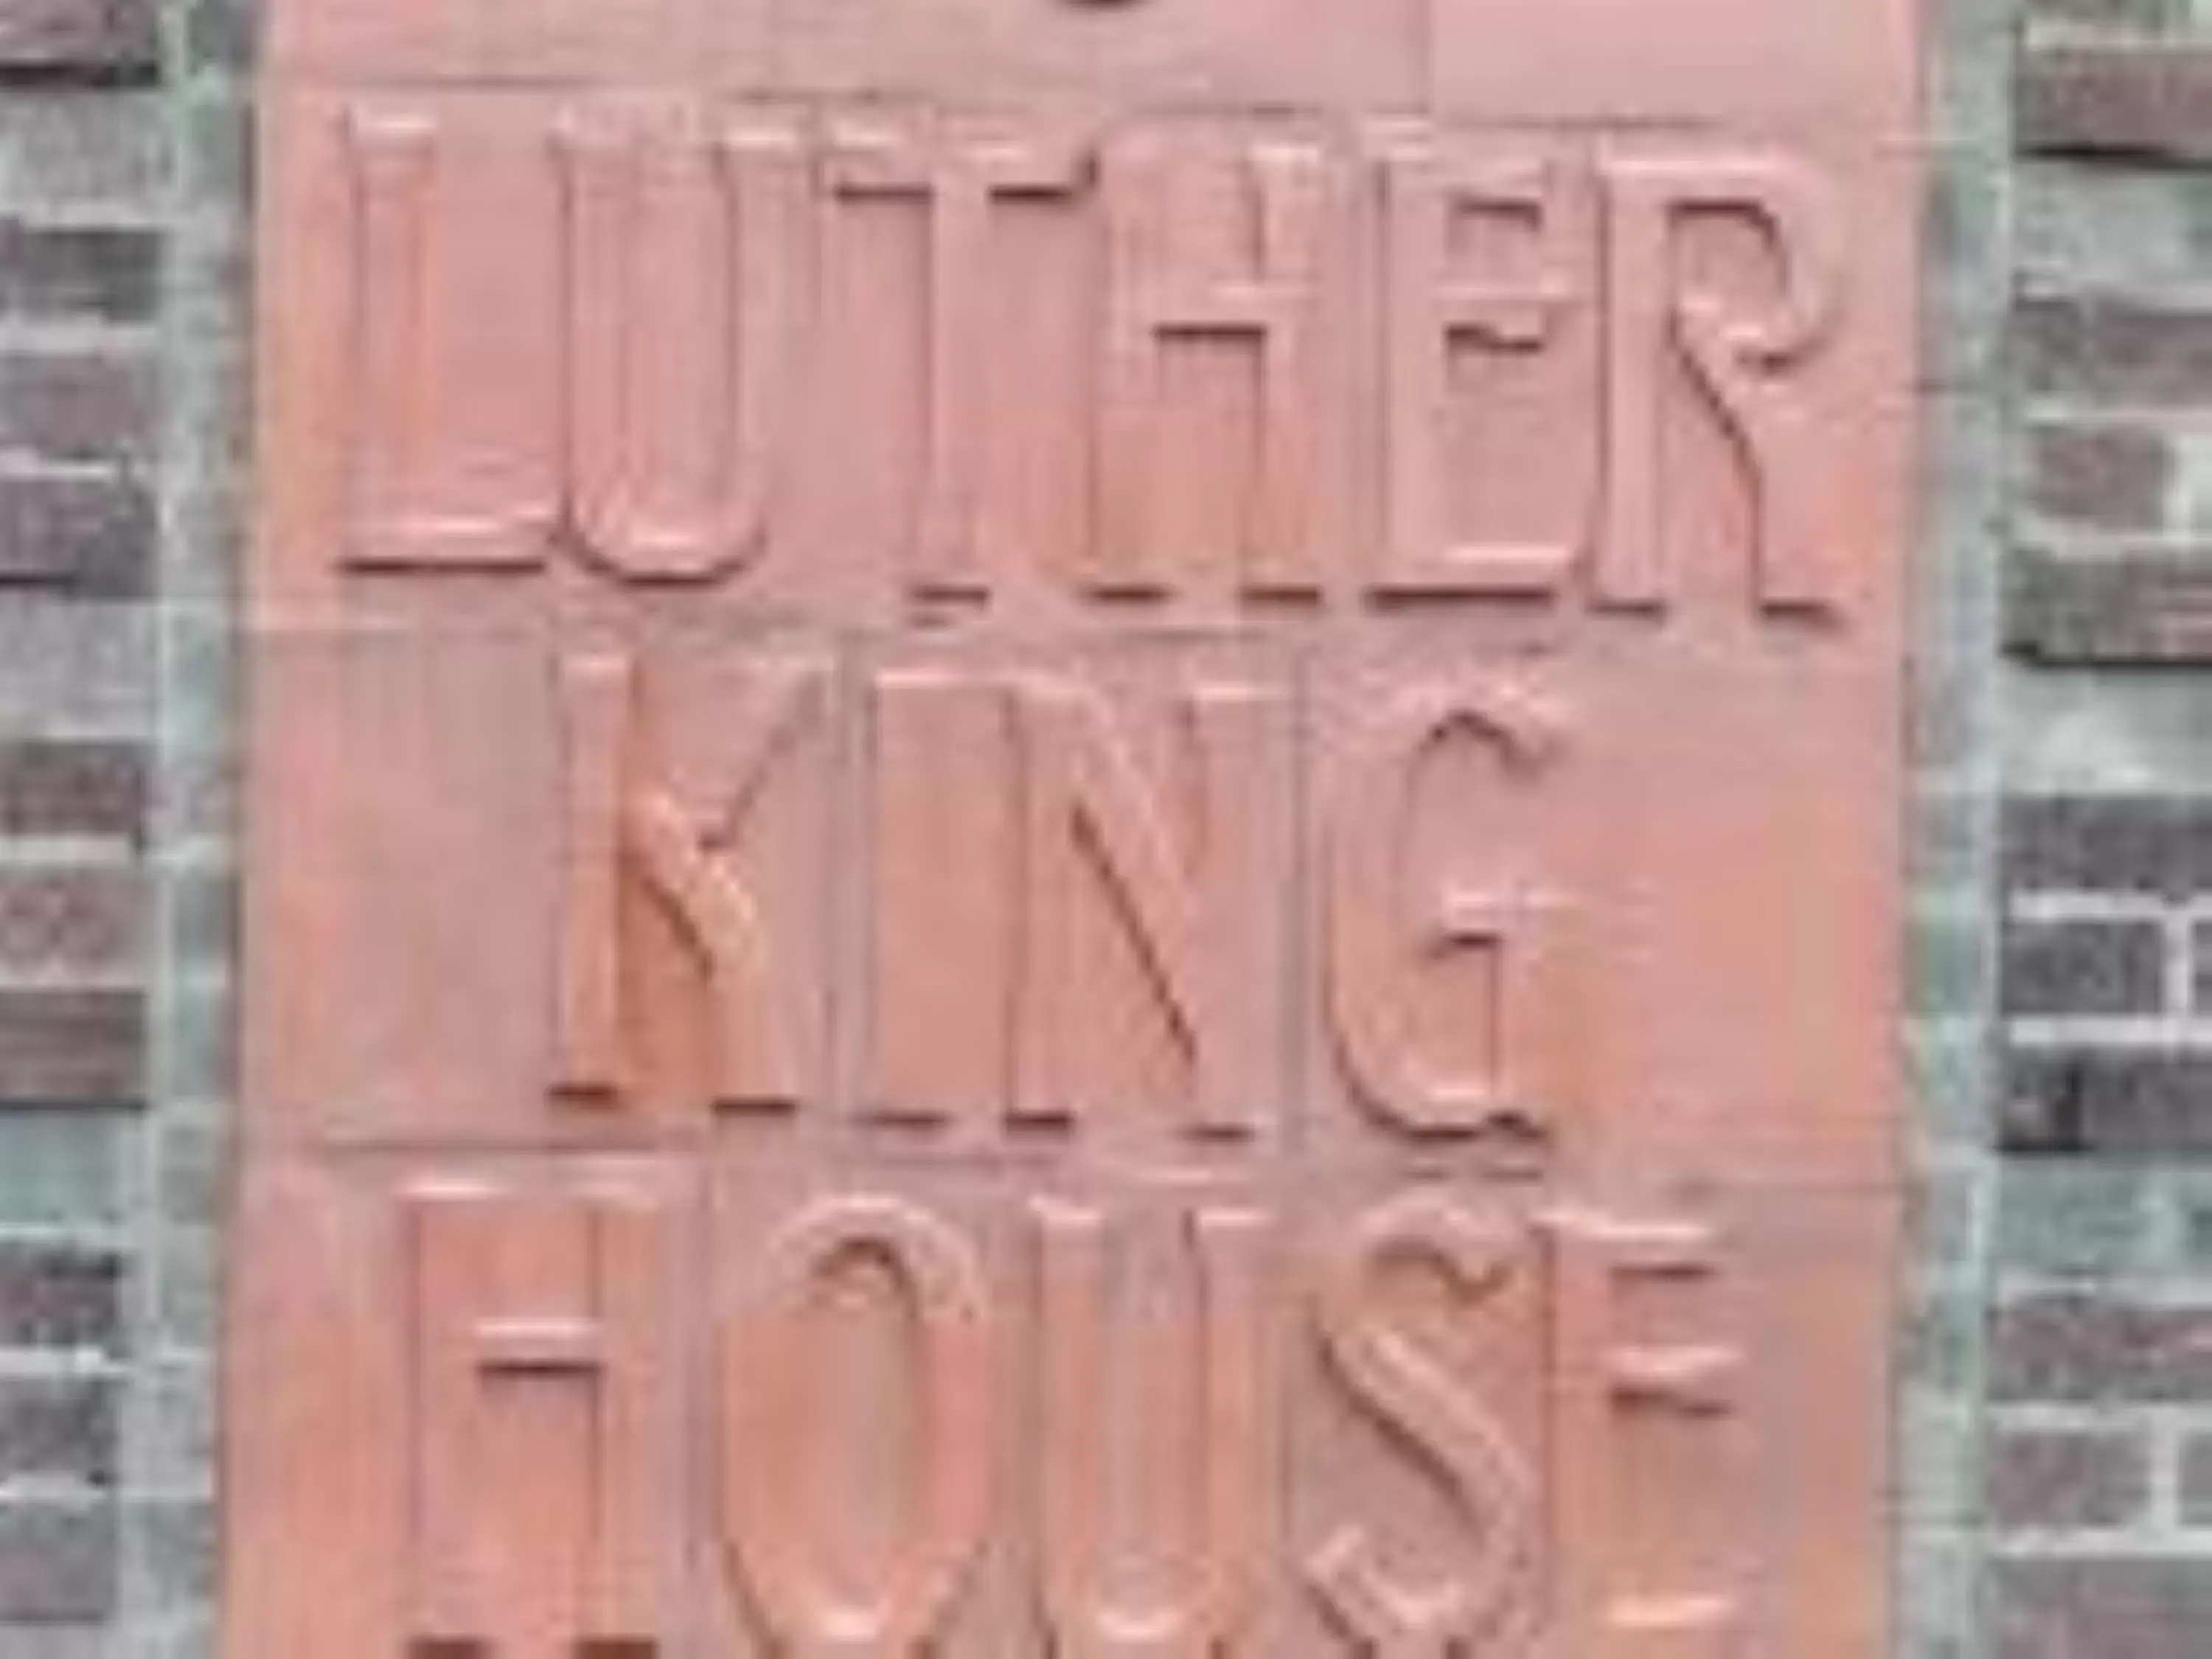 Property logo or sign in Luther King House